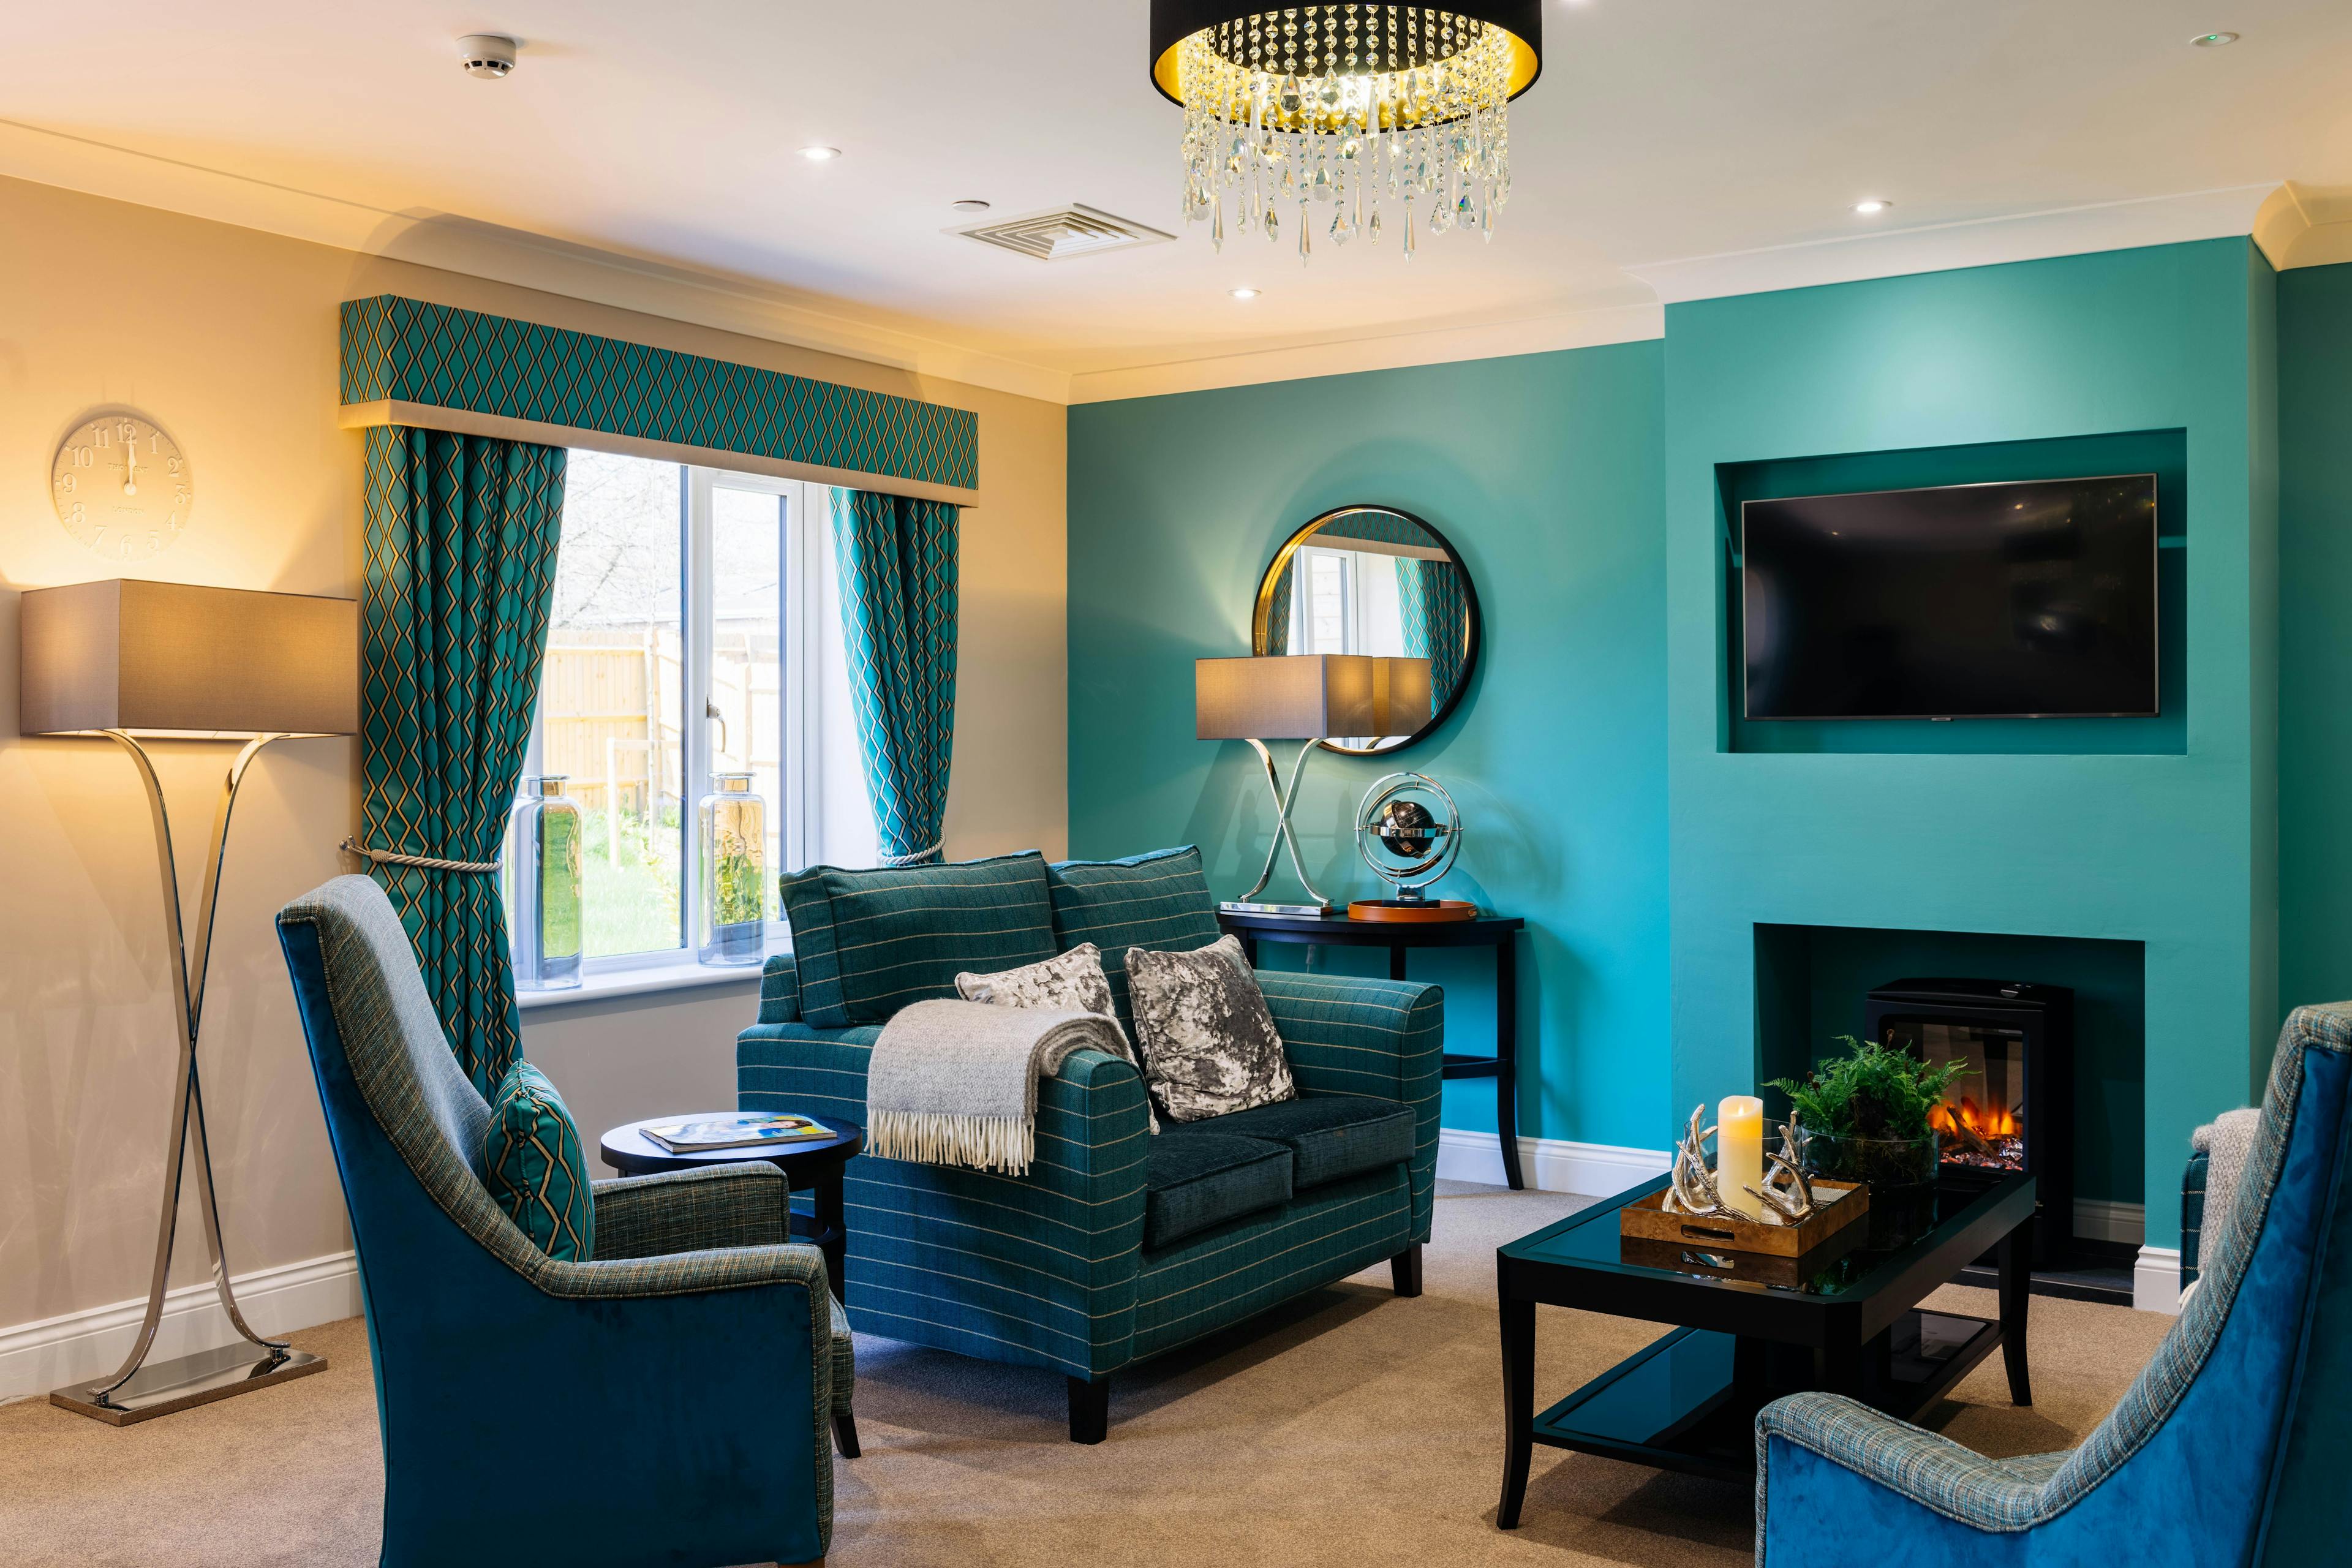 Communal Lounge at Snowdrop Place Care Home in Southampton, Hampshire